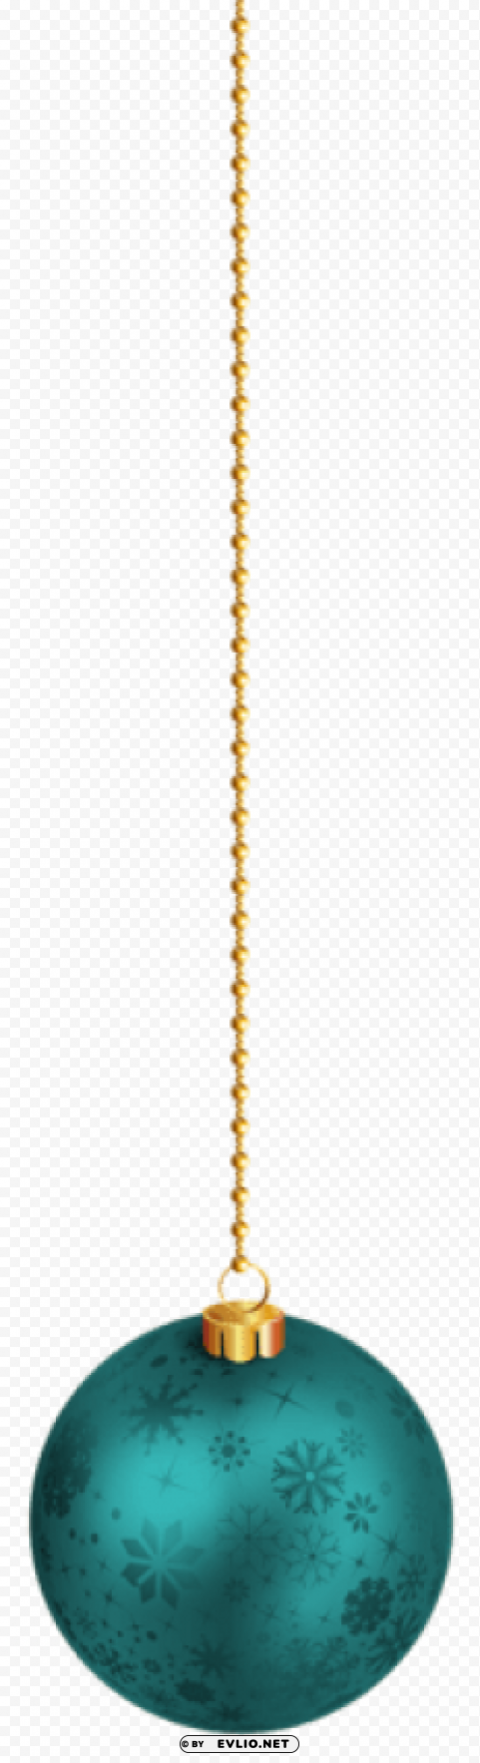 hanging blue christmas ball PNG clear images